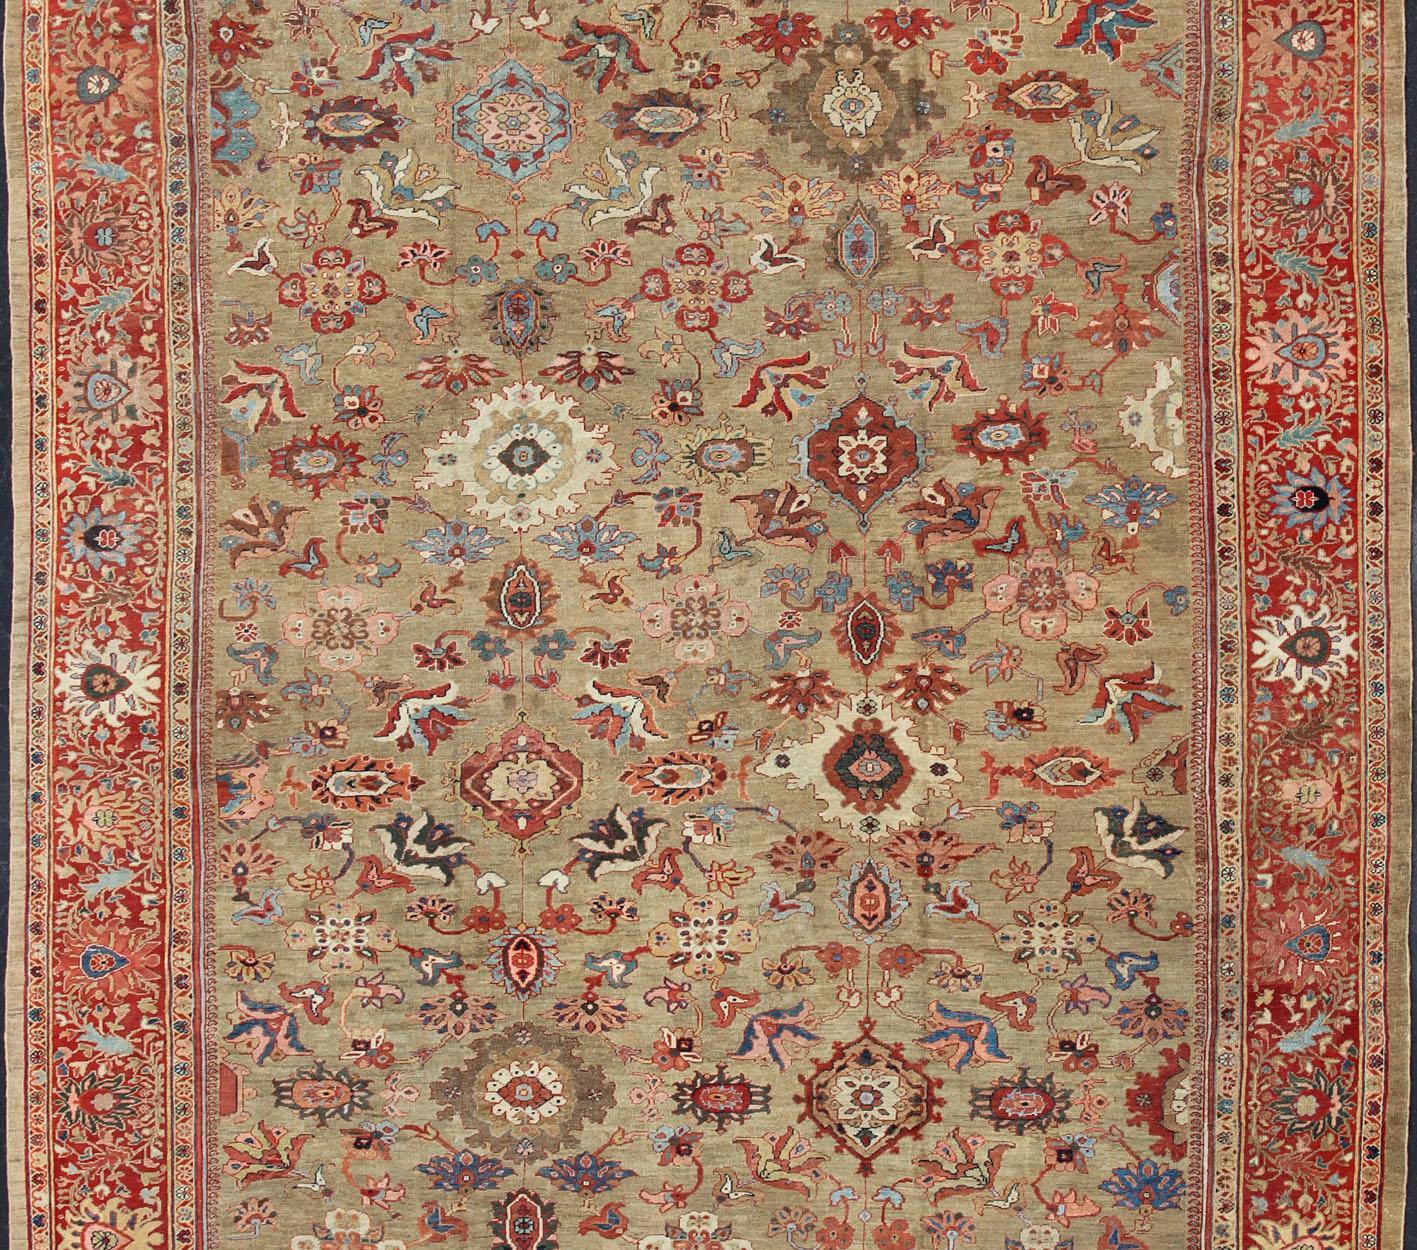 Antique Persian Large Ziegler Sultanabad Rug with Tan Background & Red Border. Tan background Ziegler Persian Sultanabad Antique. Keivan Woven Arts / kwarugs/N15-1001 Antique Persian Ziegler Sultanabad Rug.
Measures: 13'6 x 17'
This exceptional